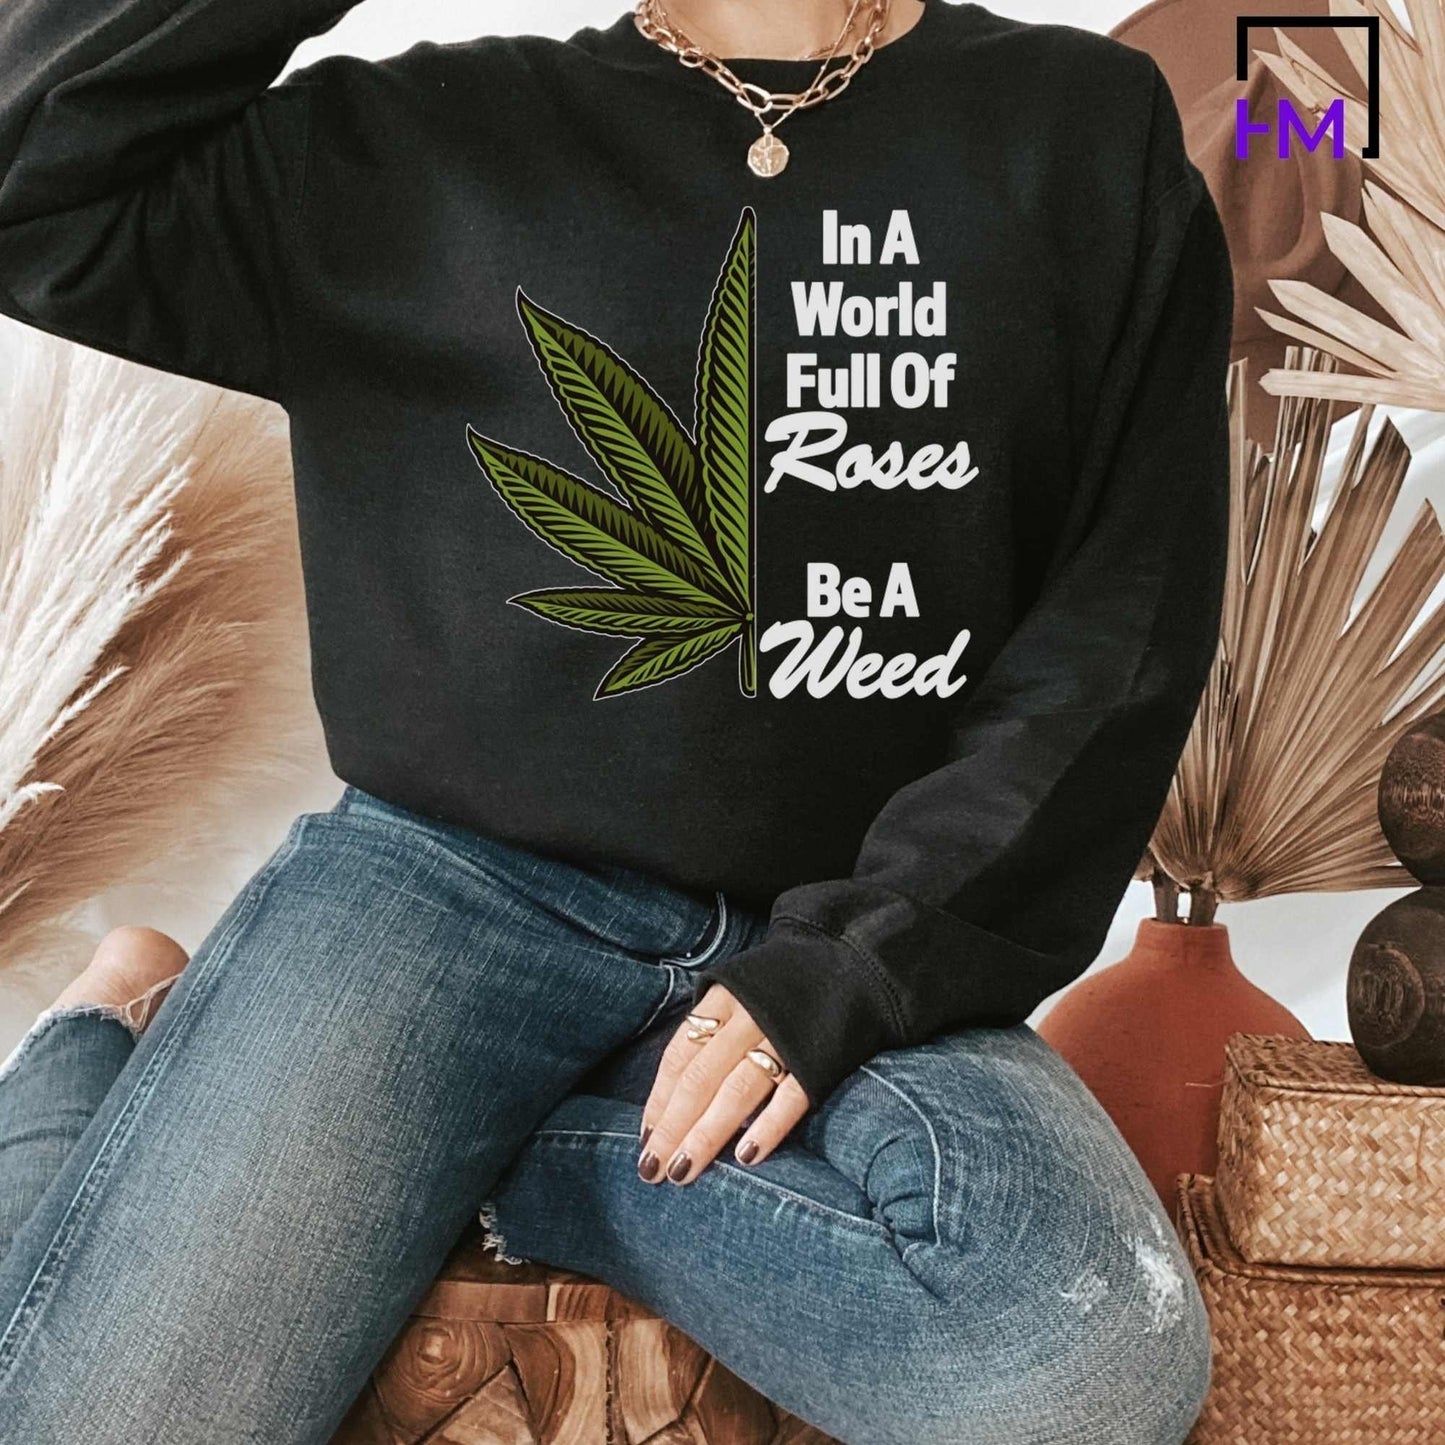 Stoner Gifts, Weed T Shirt, Stoner Girl Tee, Marijuana apparel, Cannabis Clothing, Gift for Her, Hippie Accessories, 420 Gift, Mary Jane